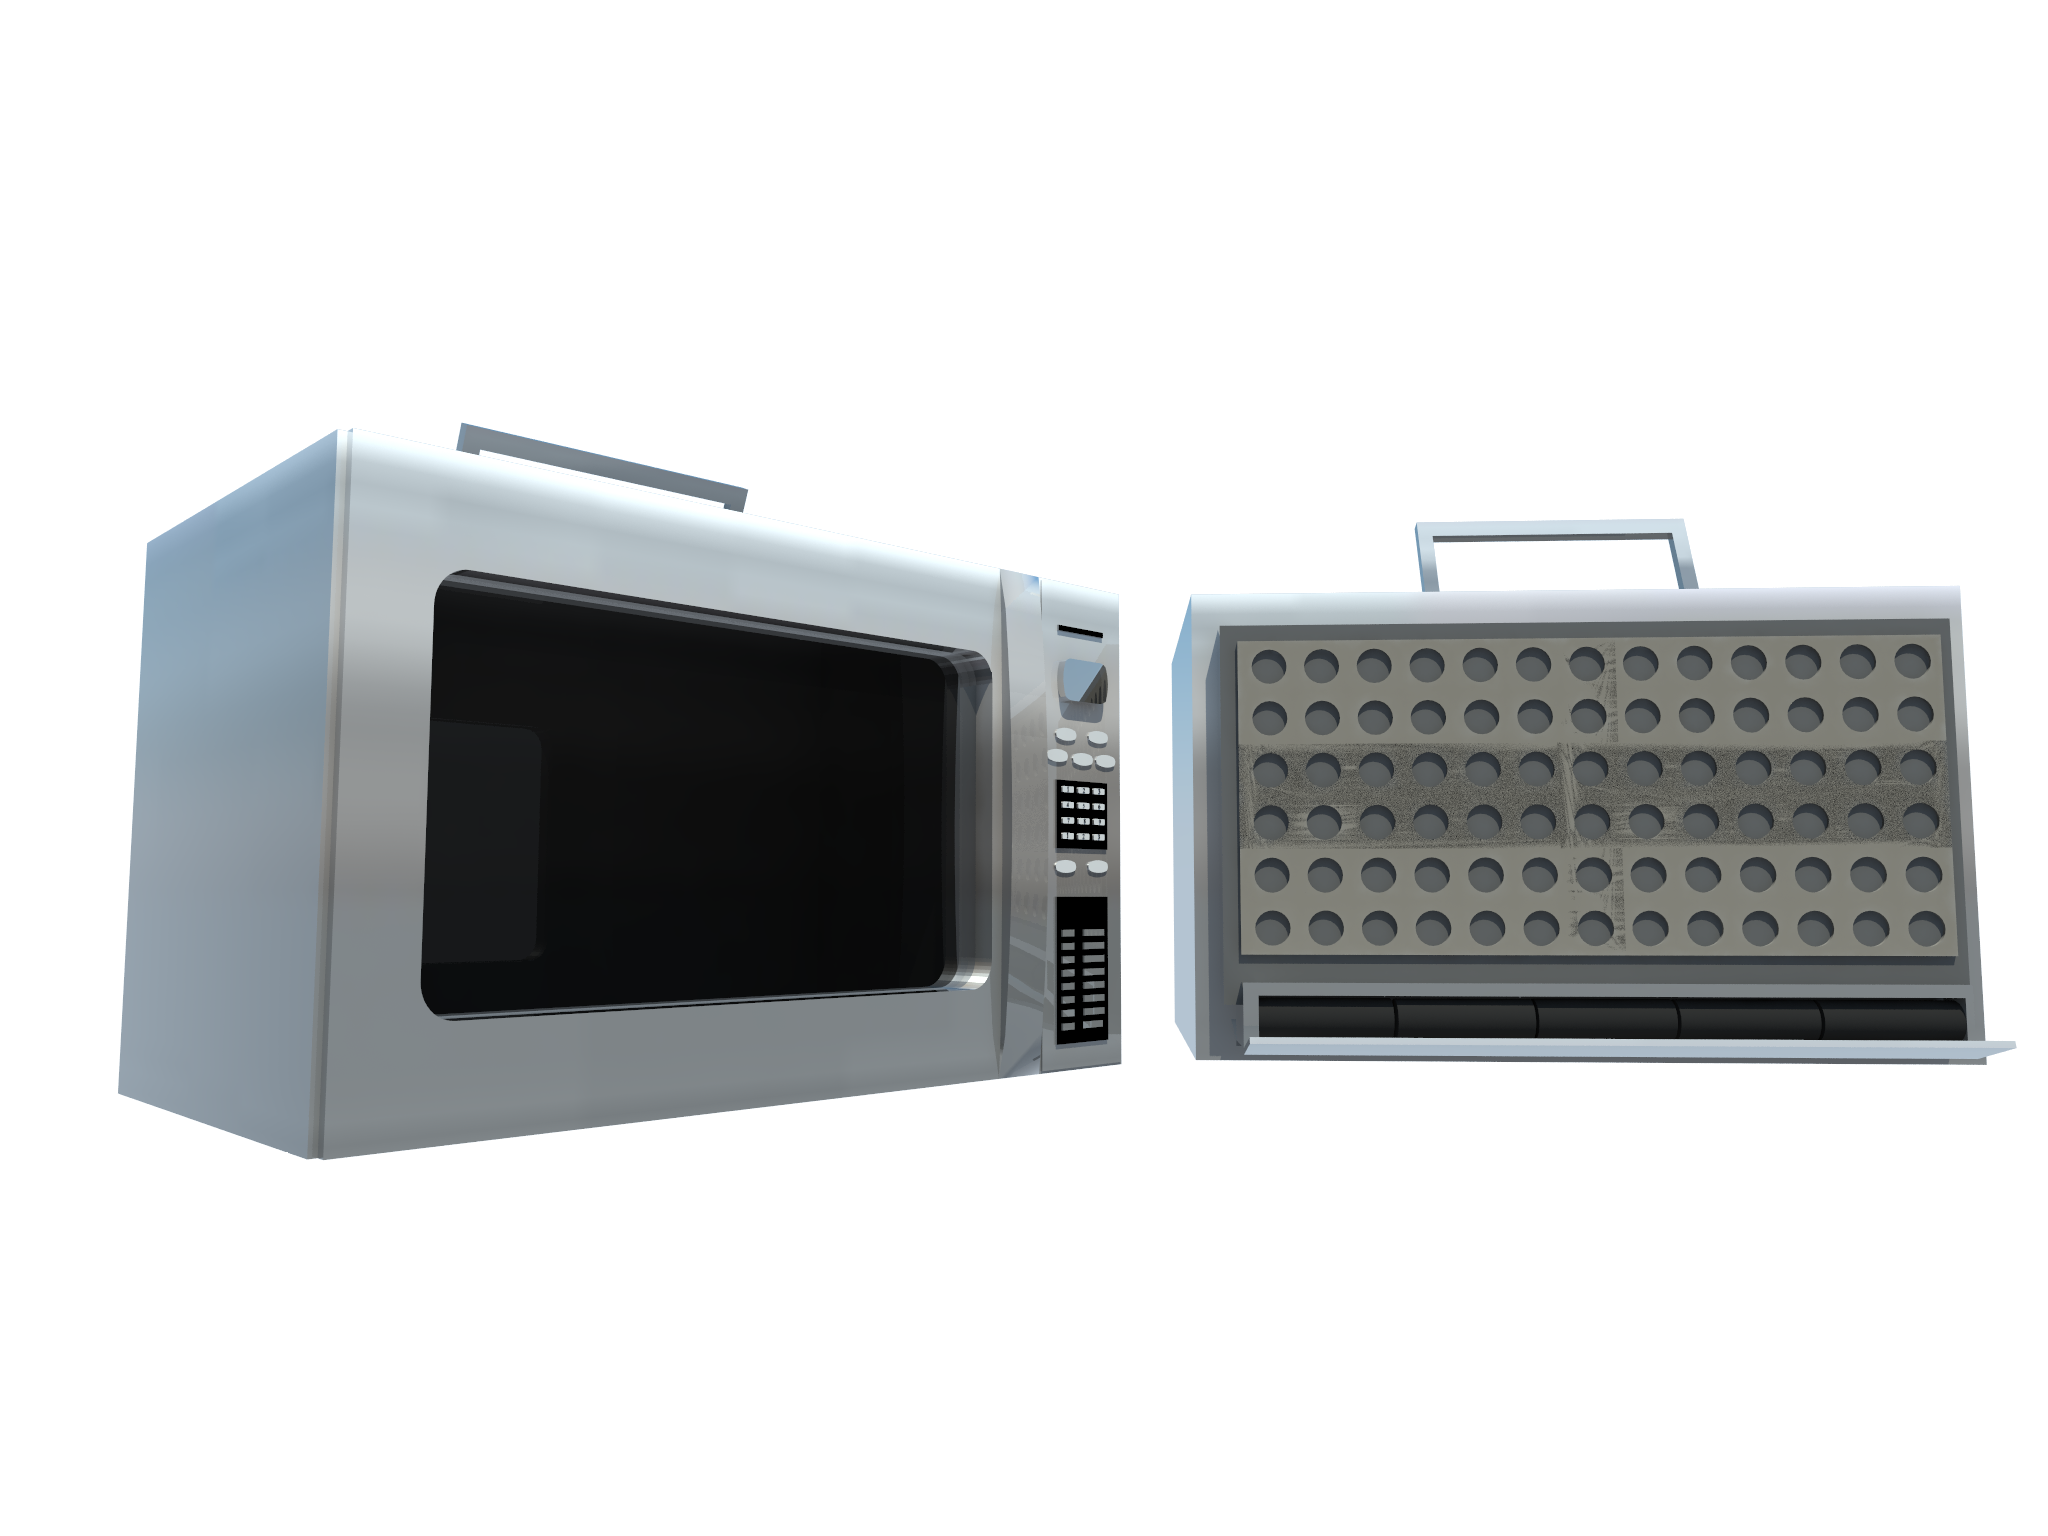 World Patent Marketing Invention Team Offers The Portable Microwave, An